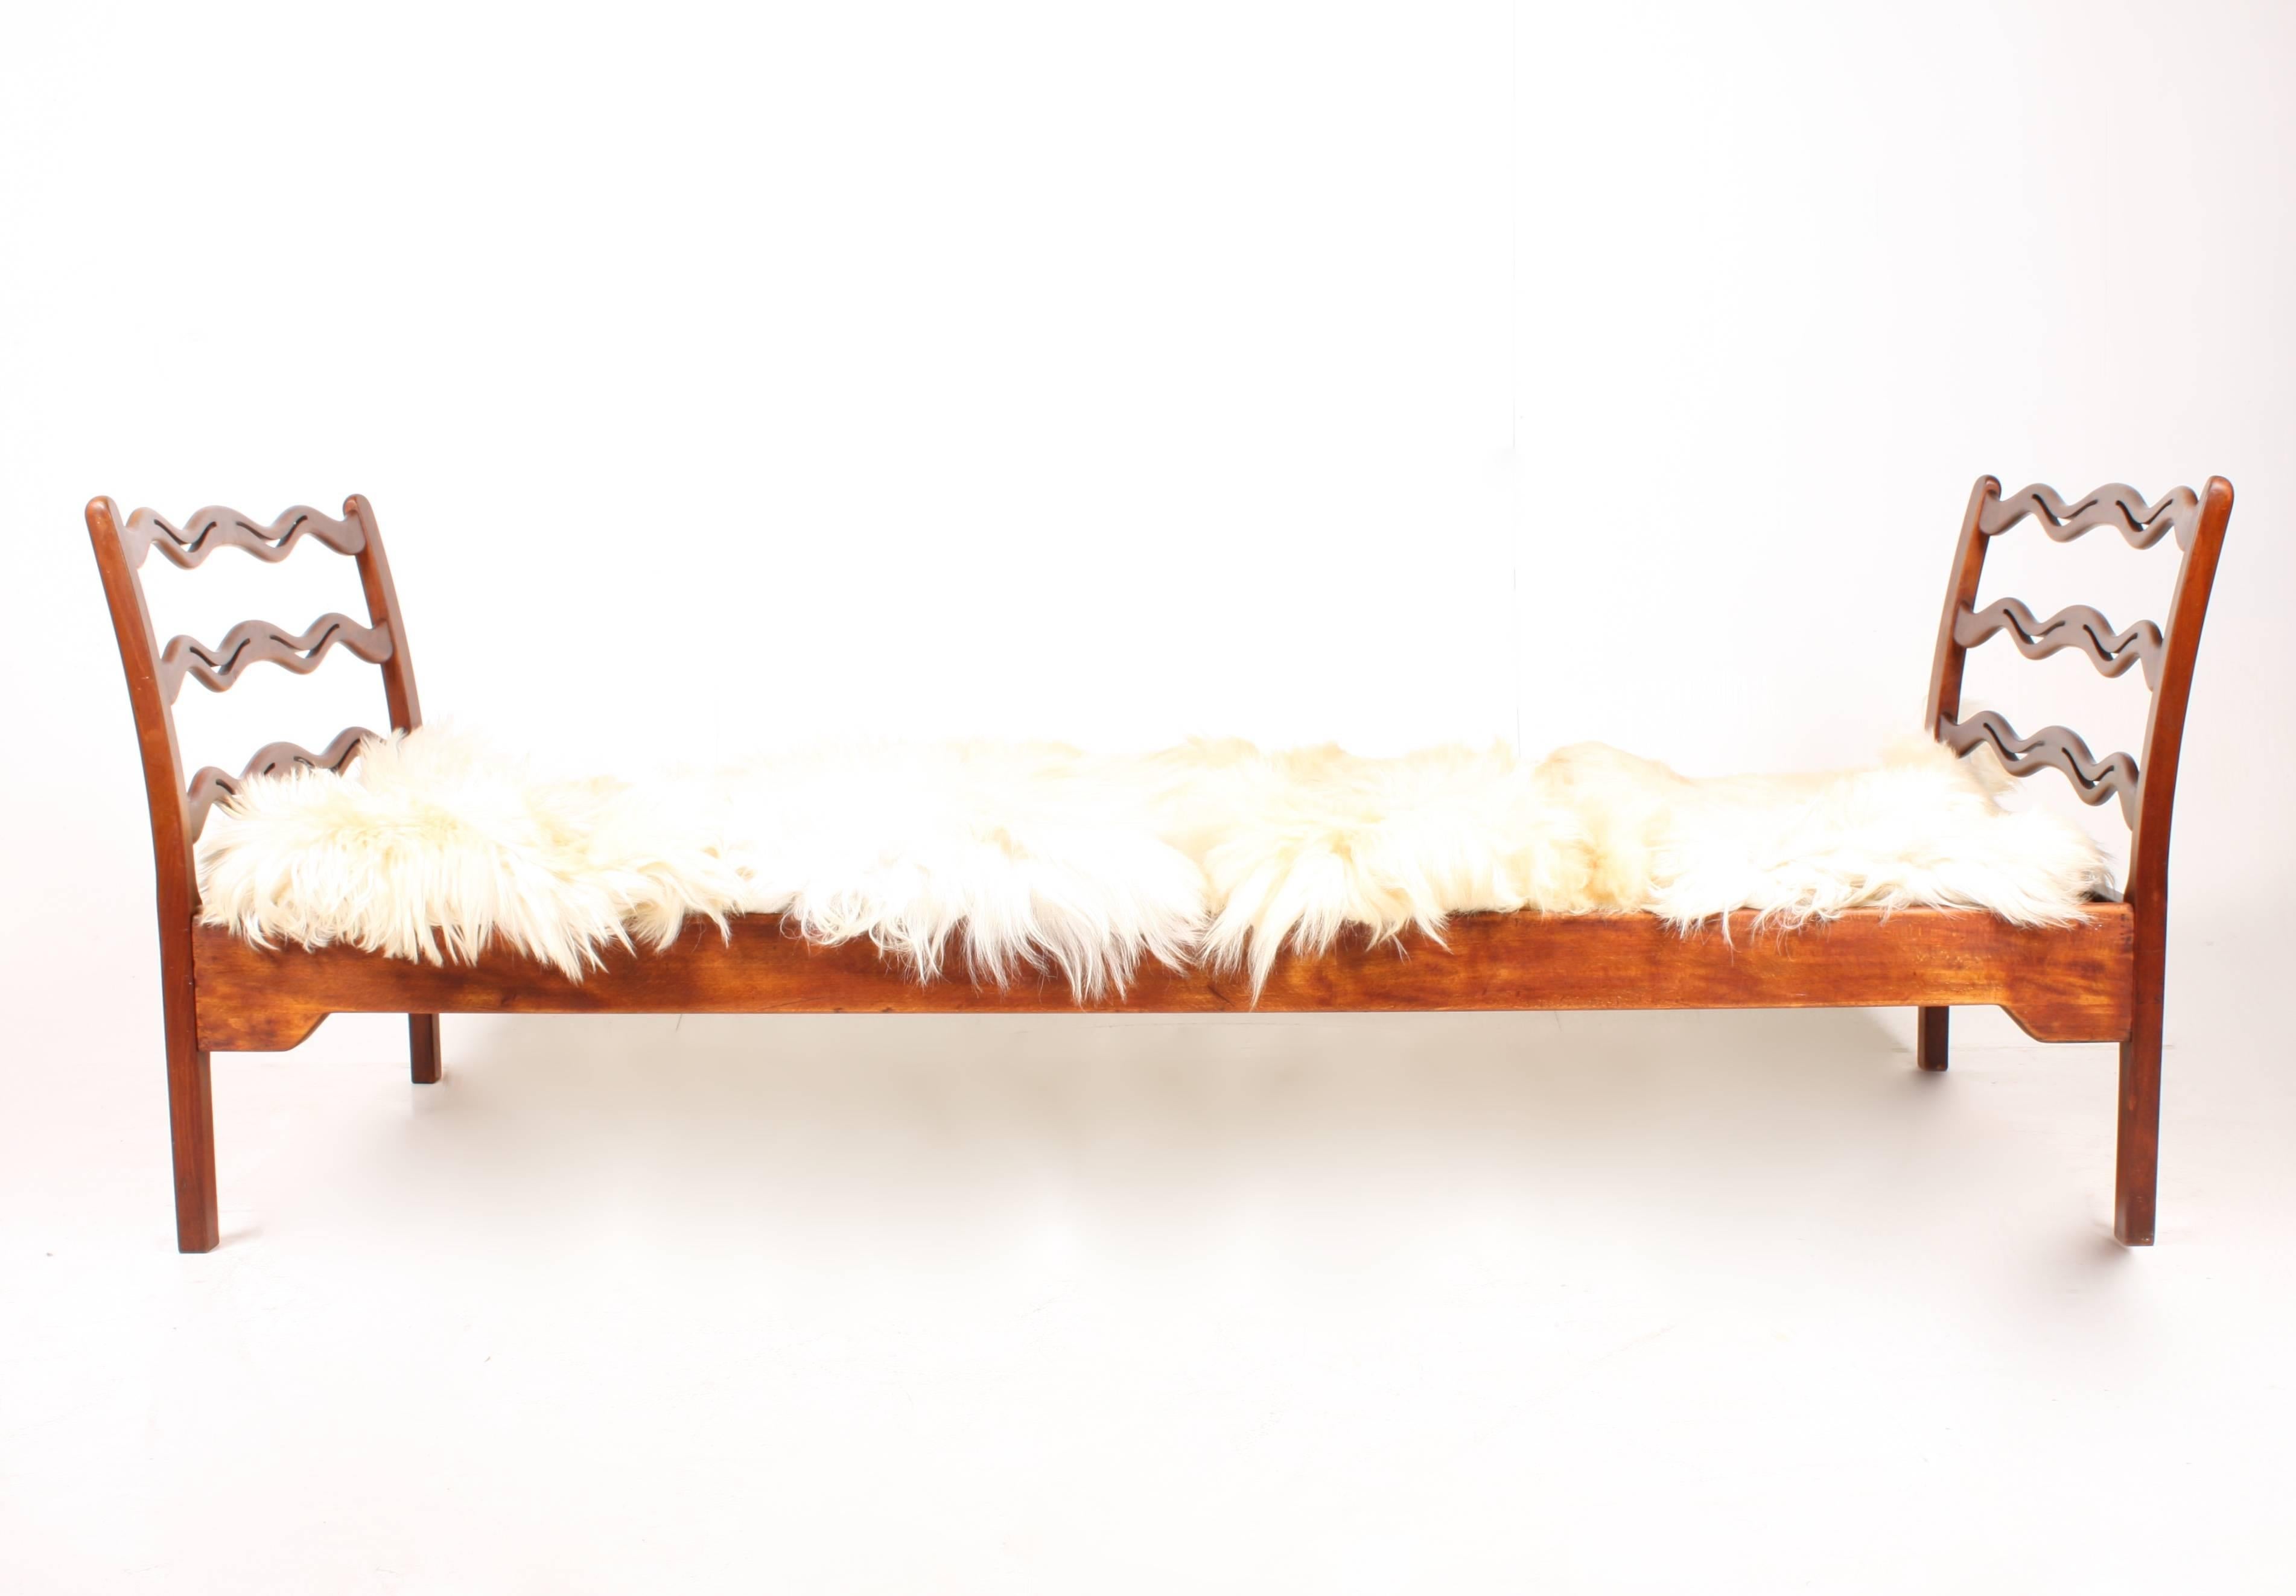 Great looking daybed in solid wood designed by Maa. Ole Wanscher in the 1950s. Made in Denmark for Fritz Hansen cabinetmakers. Great original condition.